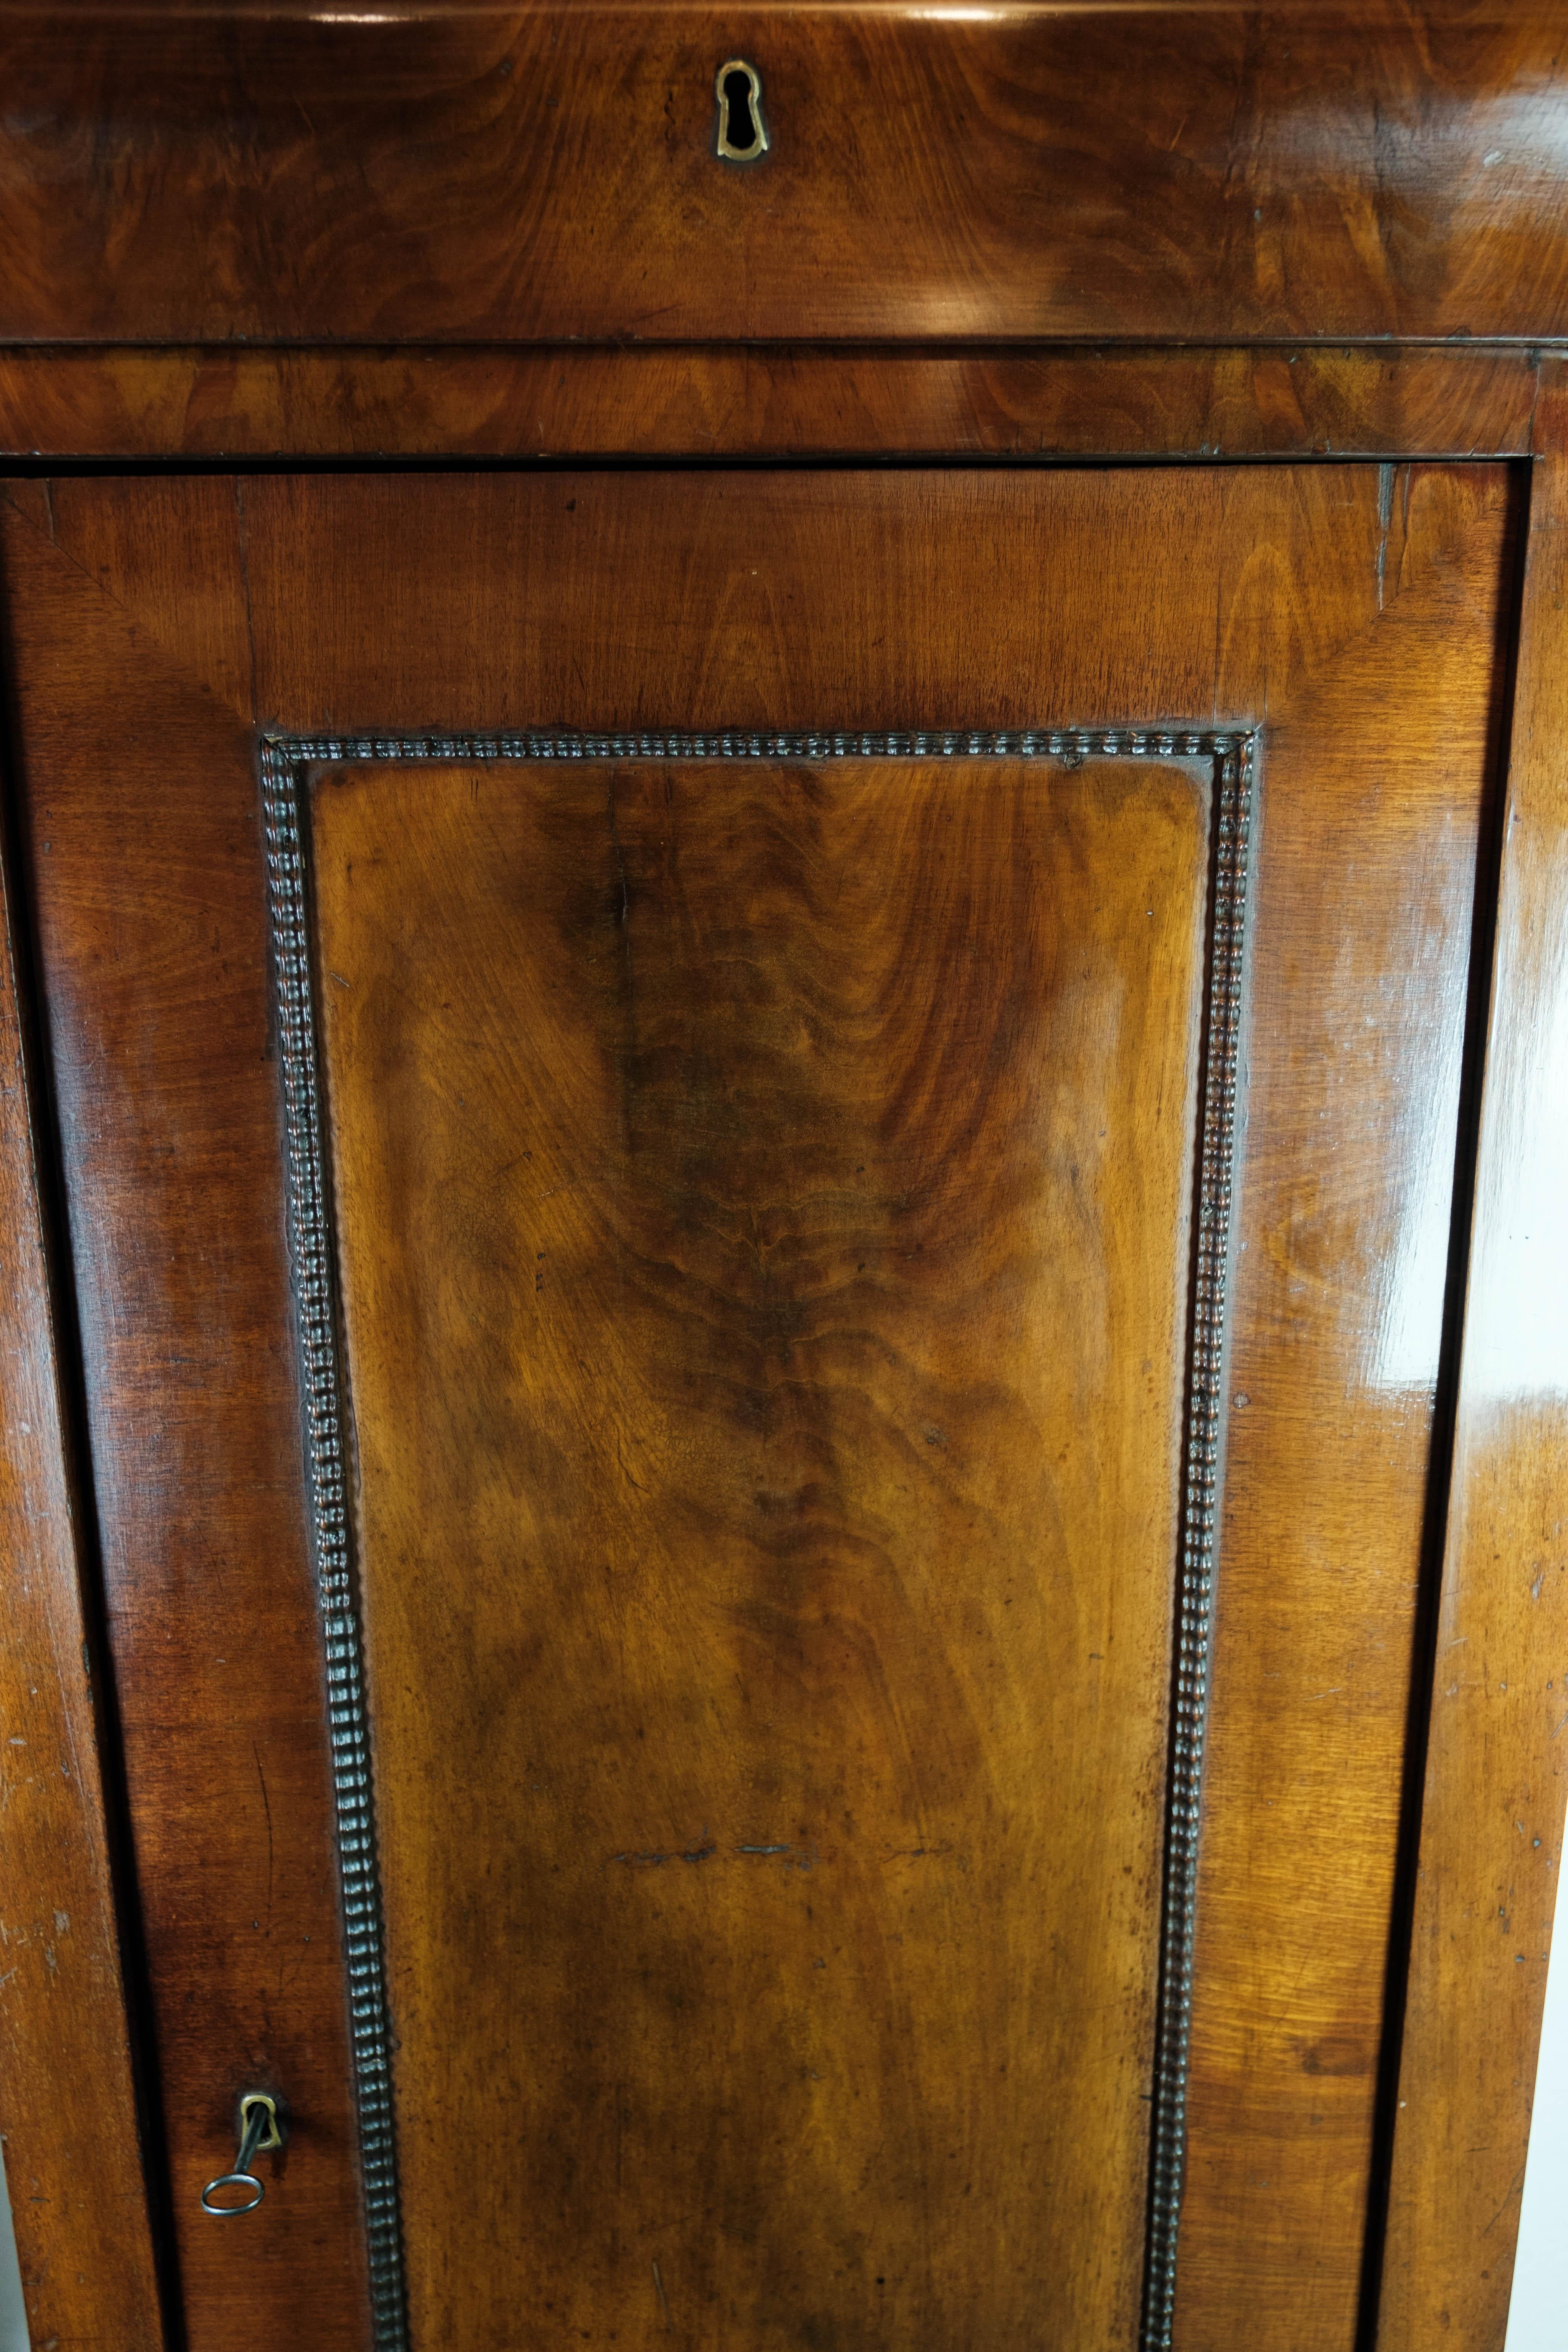 
This late Empire tall cabinet, crafted from dark polished mahogany, is a stunning example of 19th-century craftsmanship. Dating back to 1840, it stands as a testament to the elegance and sophistication of the late Empire period.

The rich, dark